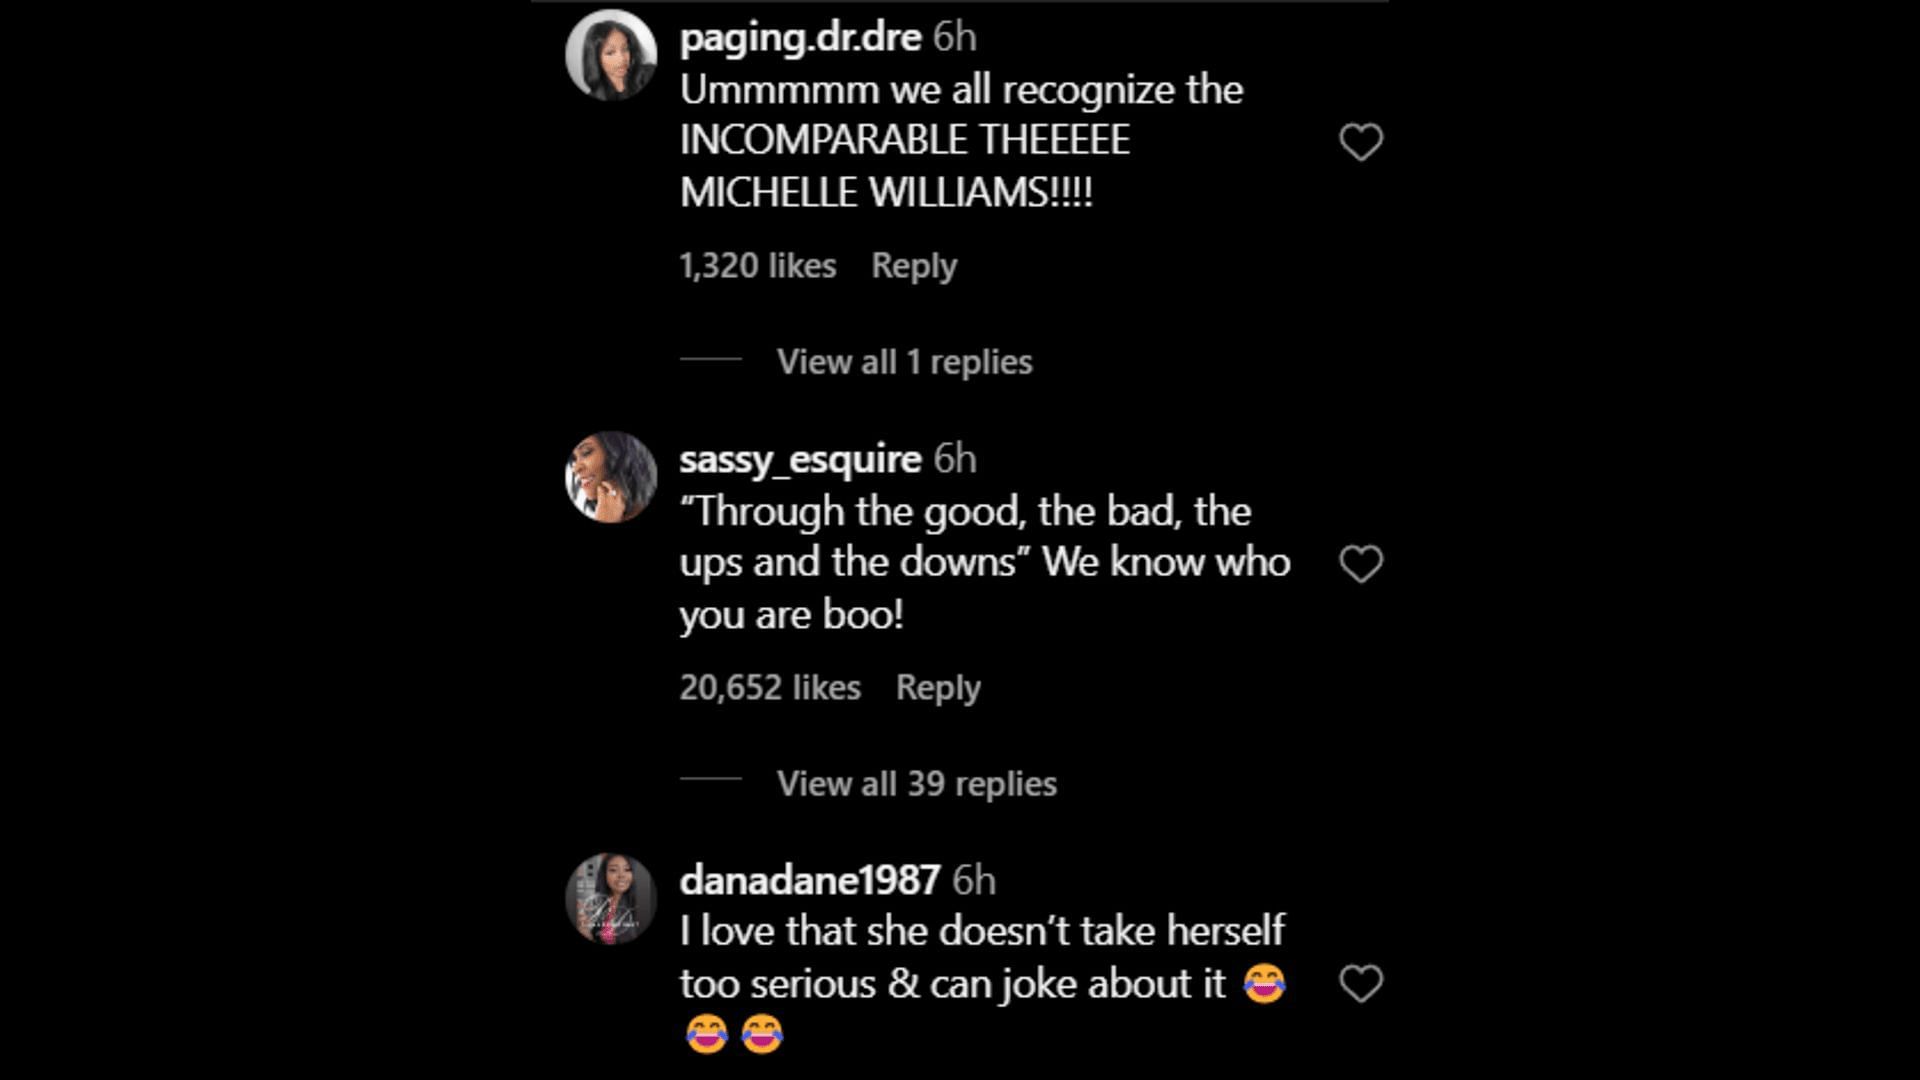 Instagrammers lauding Williams for being able to joke about herself. (Image via Instagram/ paging.dr.dre/ sassy_esquire/ danadane1987)